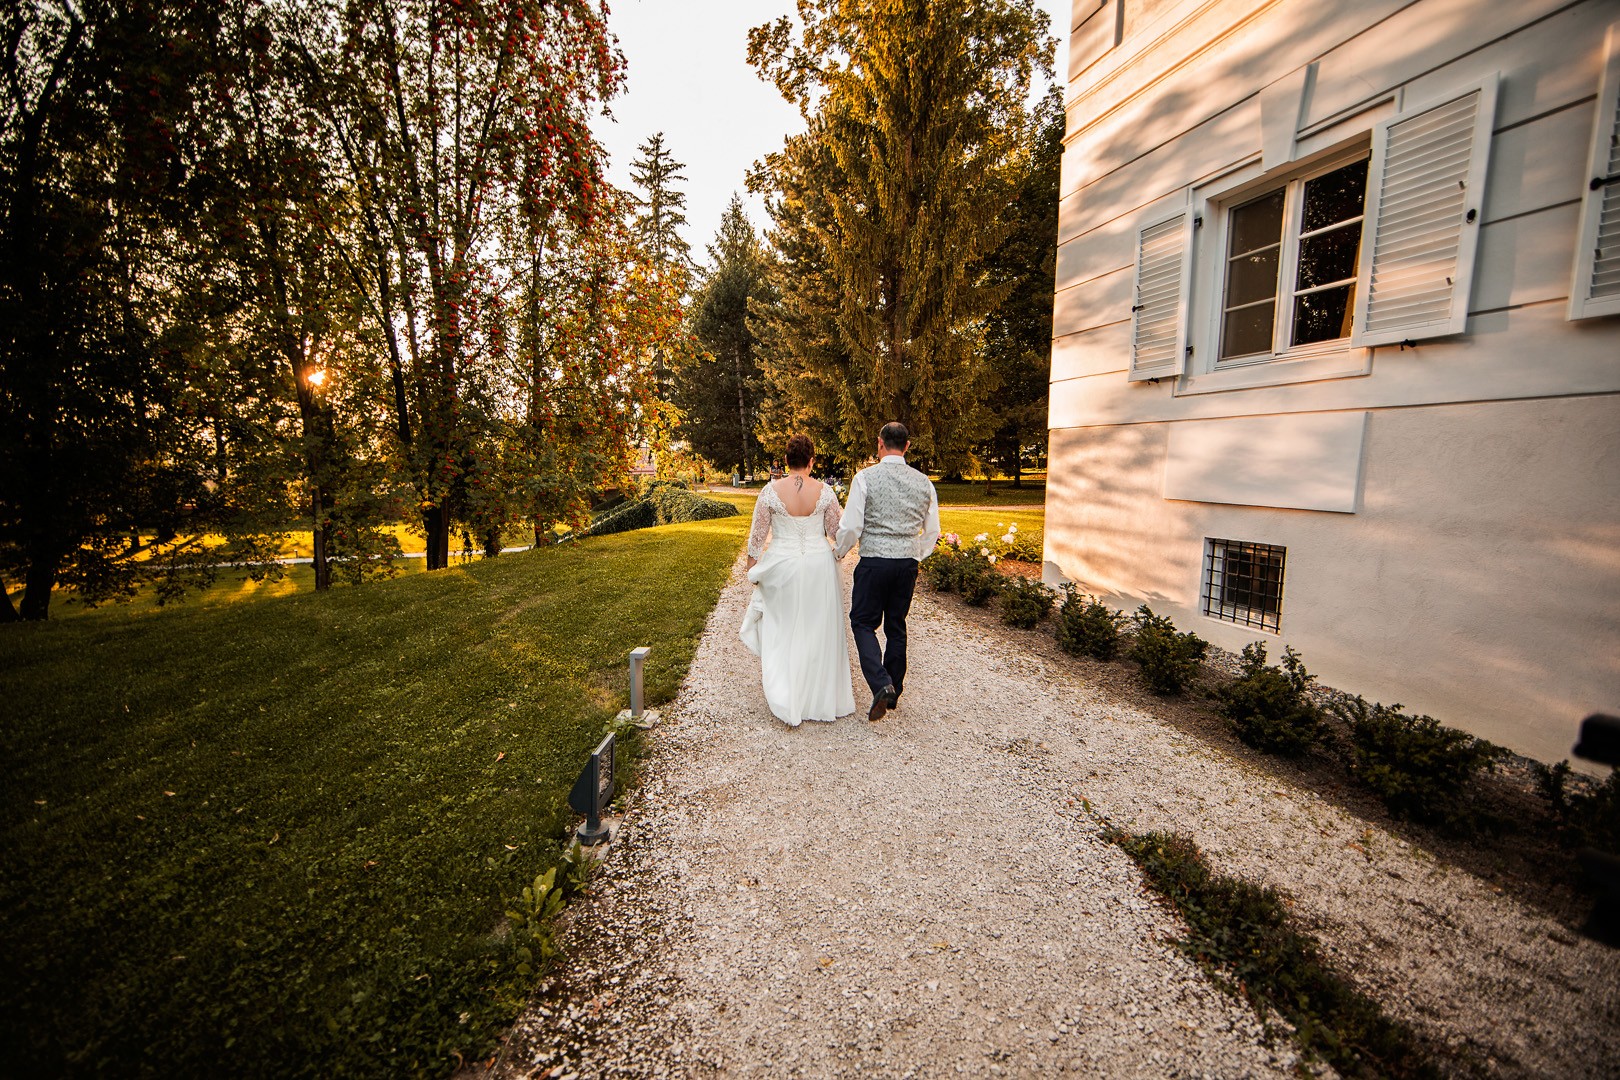 Wedding photos from the Slovak-Italian wedding of Mirka and Baldy in the beautiful surroundings of the Gbeľany Manor House - 0344.jpg